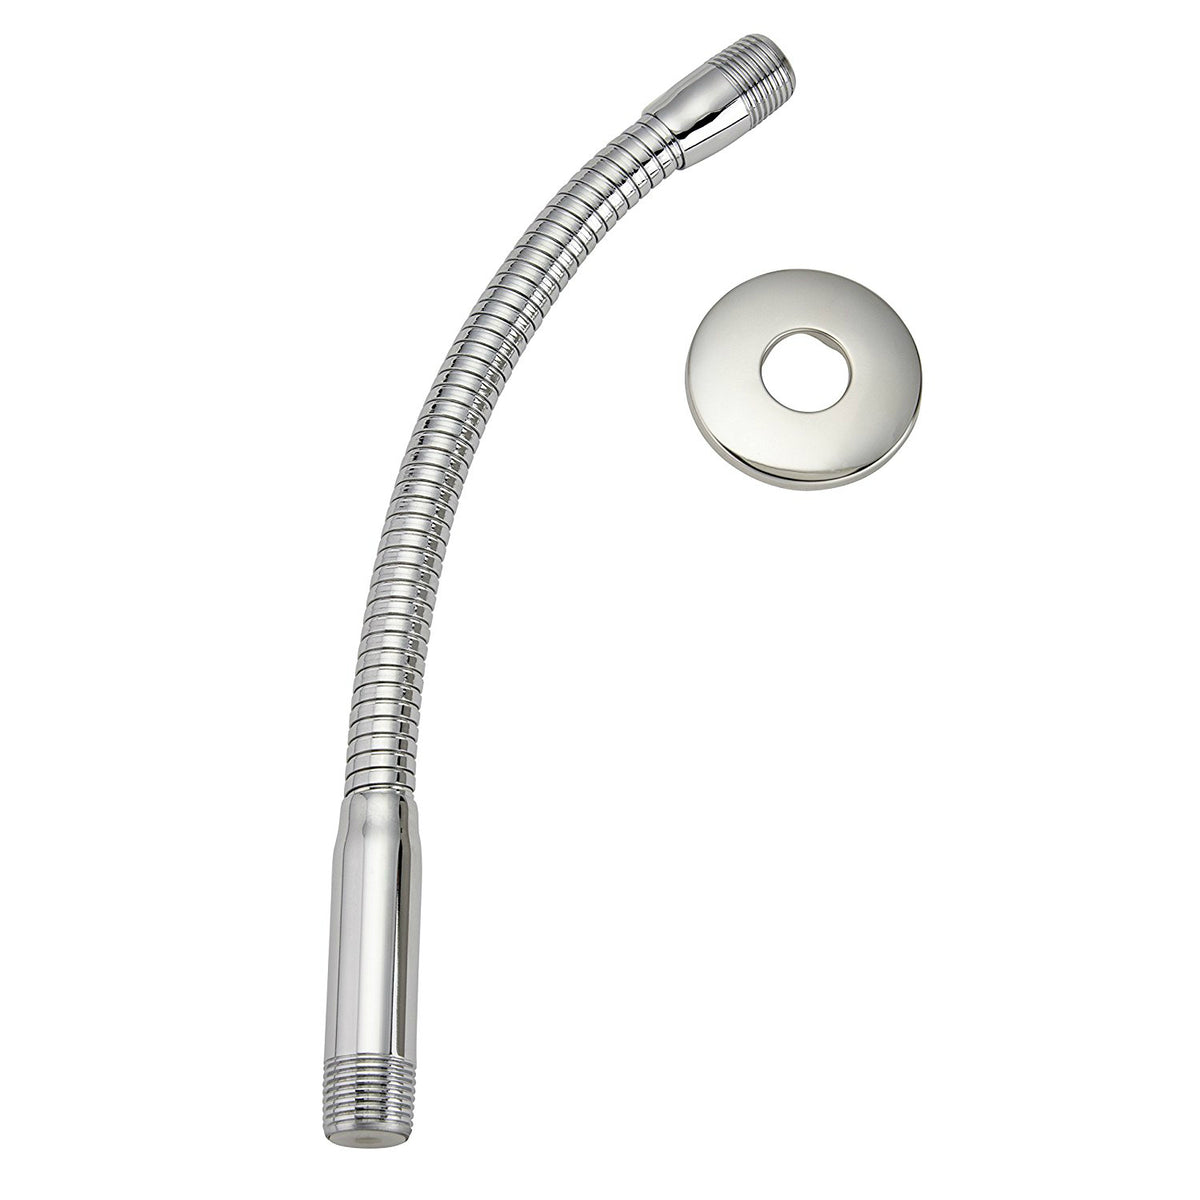 Keeney K780CP Stylewise Flexible Shower Arm, Polished Chrome, 11-1/2"